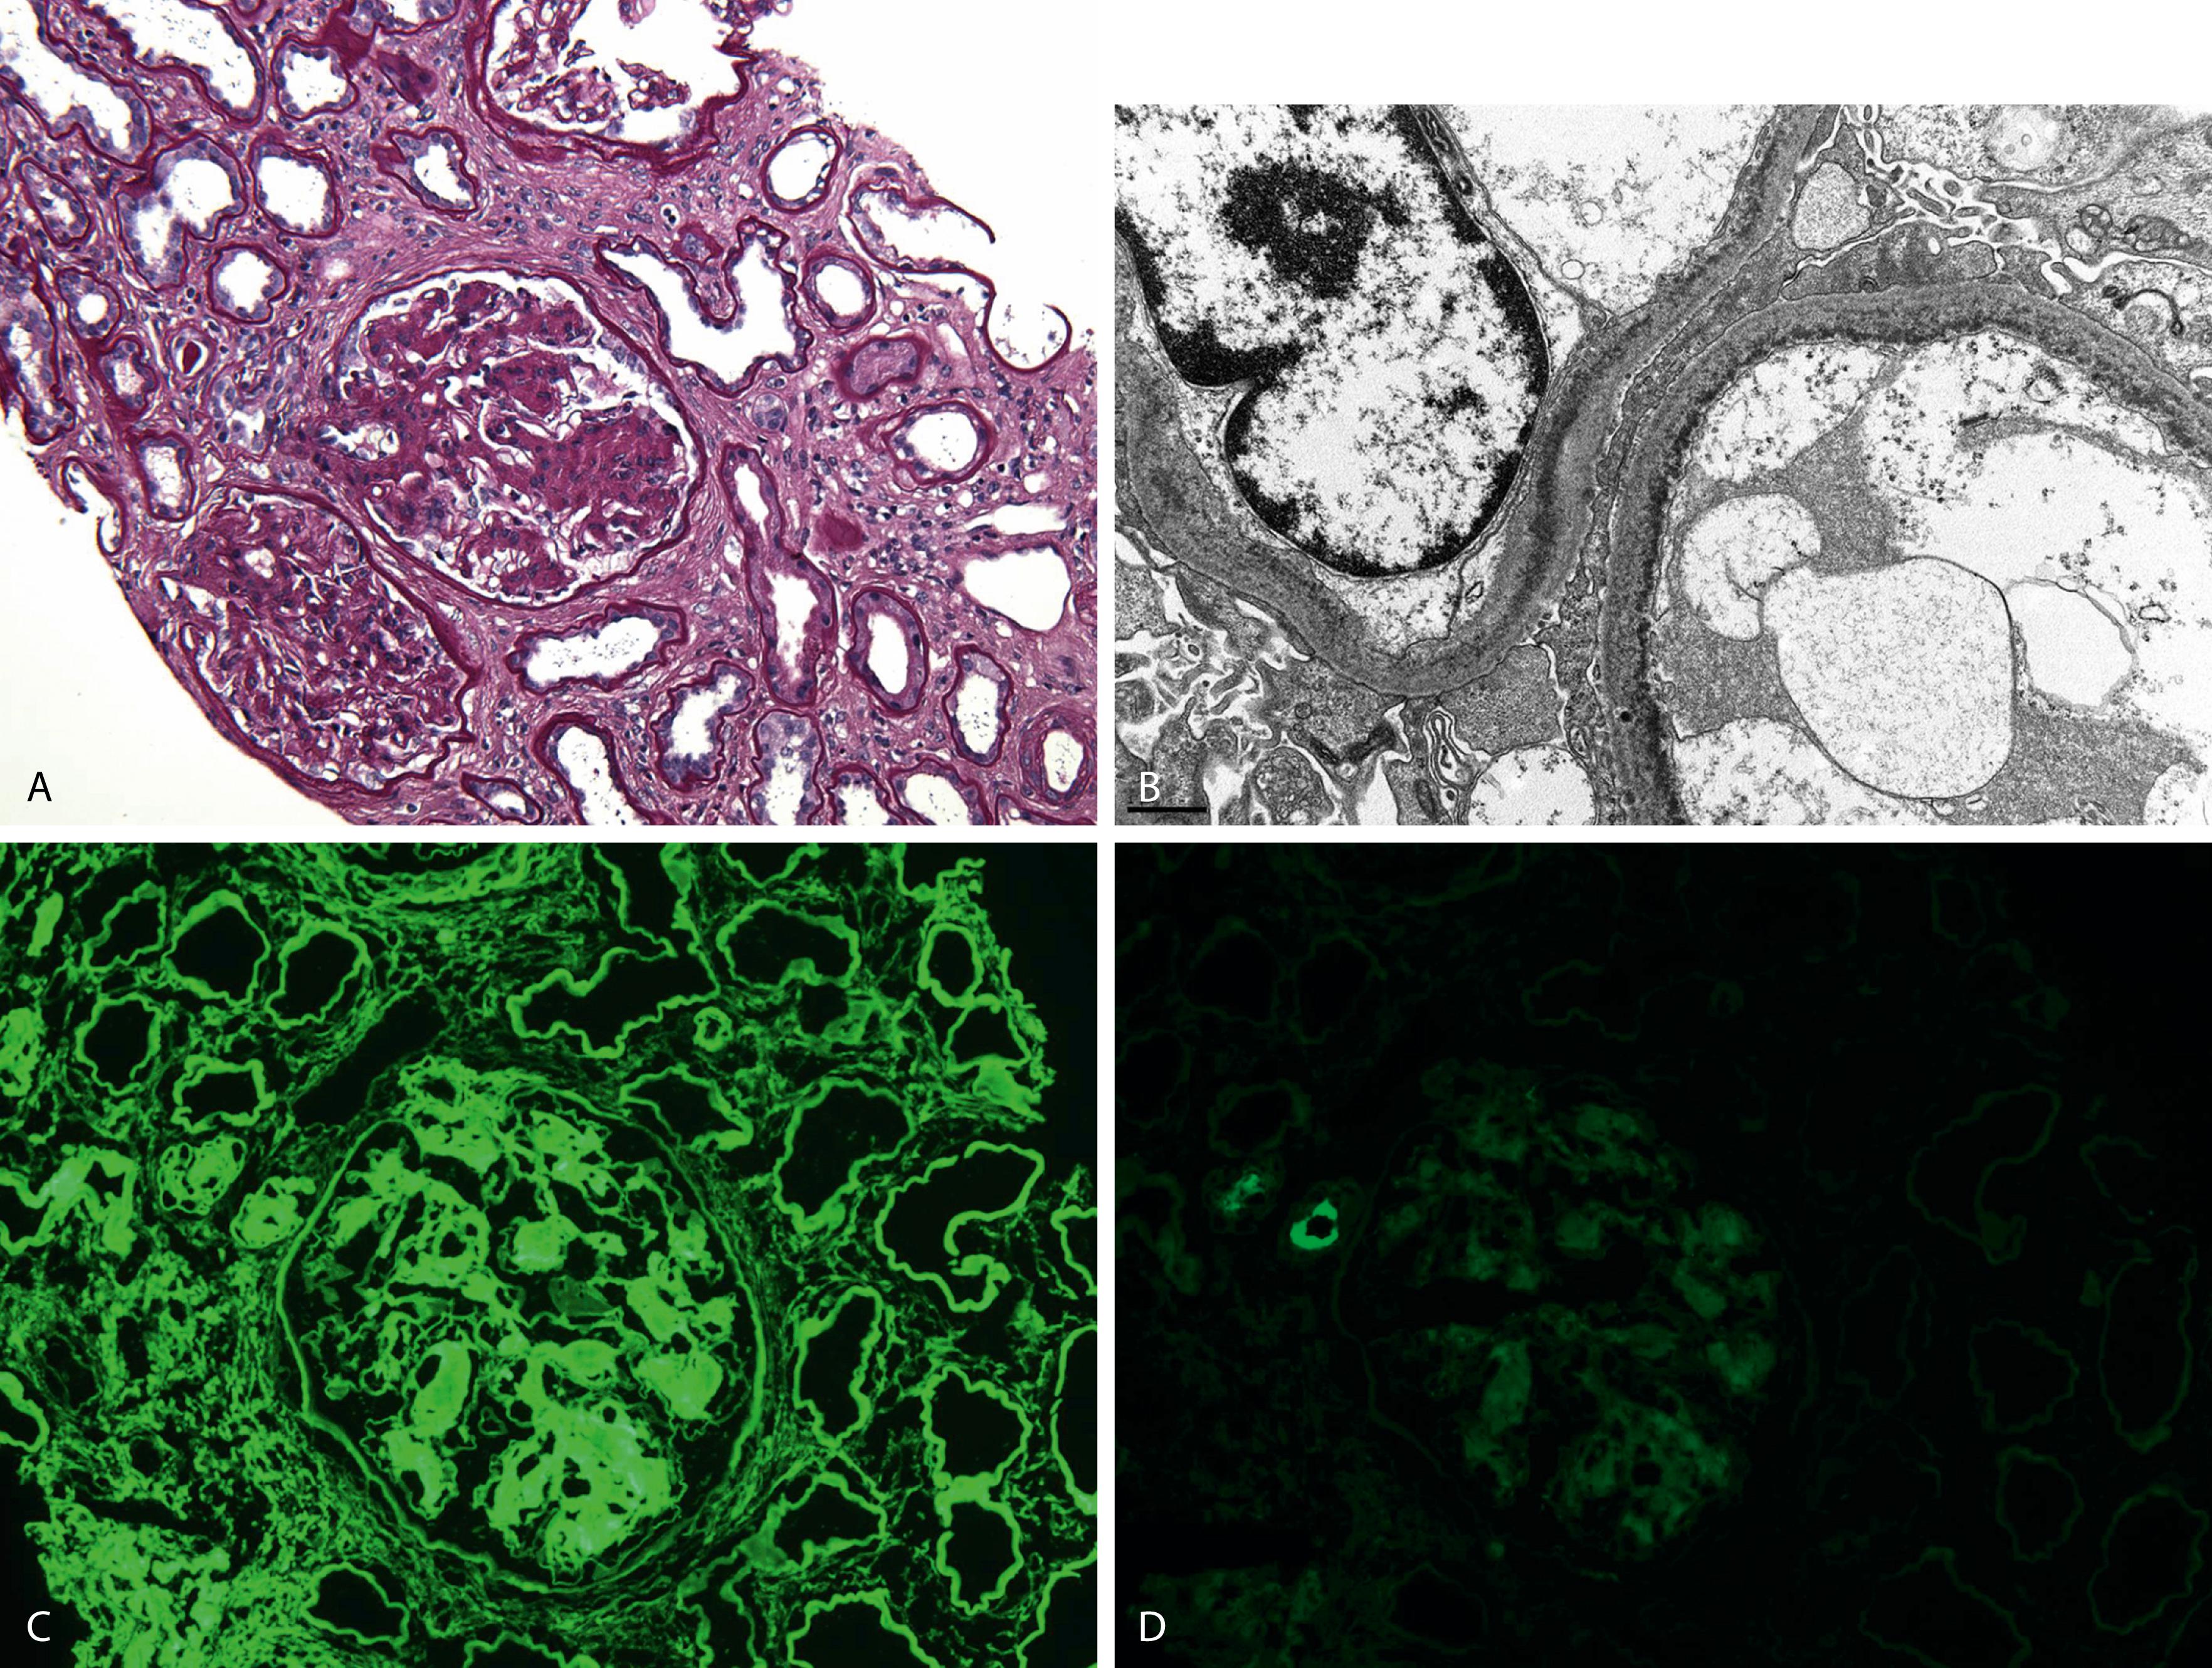 Fig. 14.27, Light-chain deposition disease (LCDD). (A) The glomerulus in LCDD shows nodular glomerulosclerosis that mimics the pattern of nodular sclerosis in diabetic nephropathy. Notice the thickening of adjacent tubular basement membranes (periodic acid–Schiff stain). (B) Ultrastructural examination shows the dense, powdery punctate deposition of light-chain material along glomerular basement membranes (transmission electron microscope). (C) Direct immunofluorescence shows linear staining along the tubular basement membranes and the mesangium of glomeruli for κ light chain and negative staining for λ light chain (D).